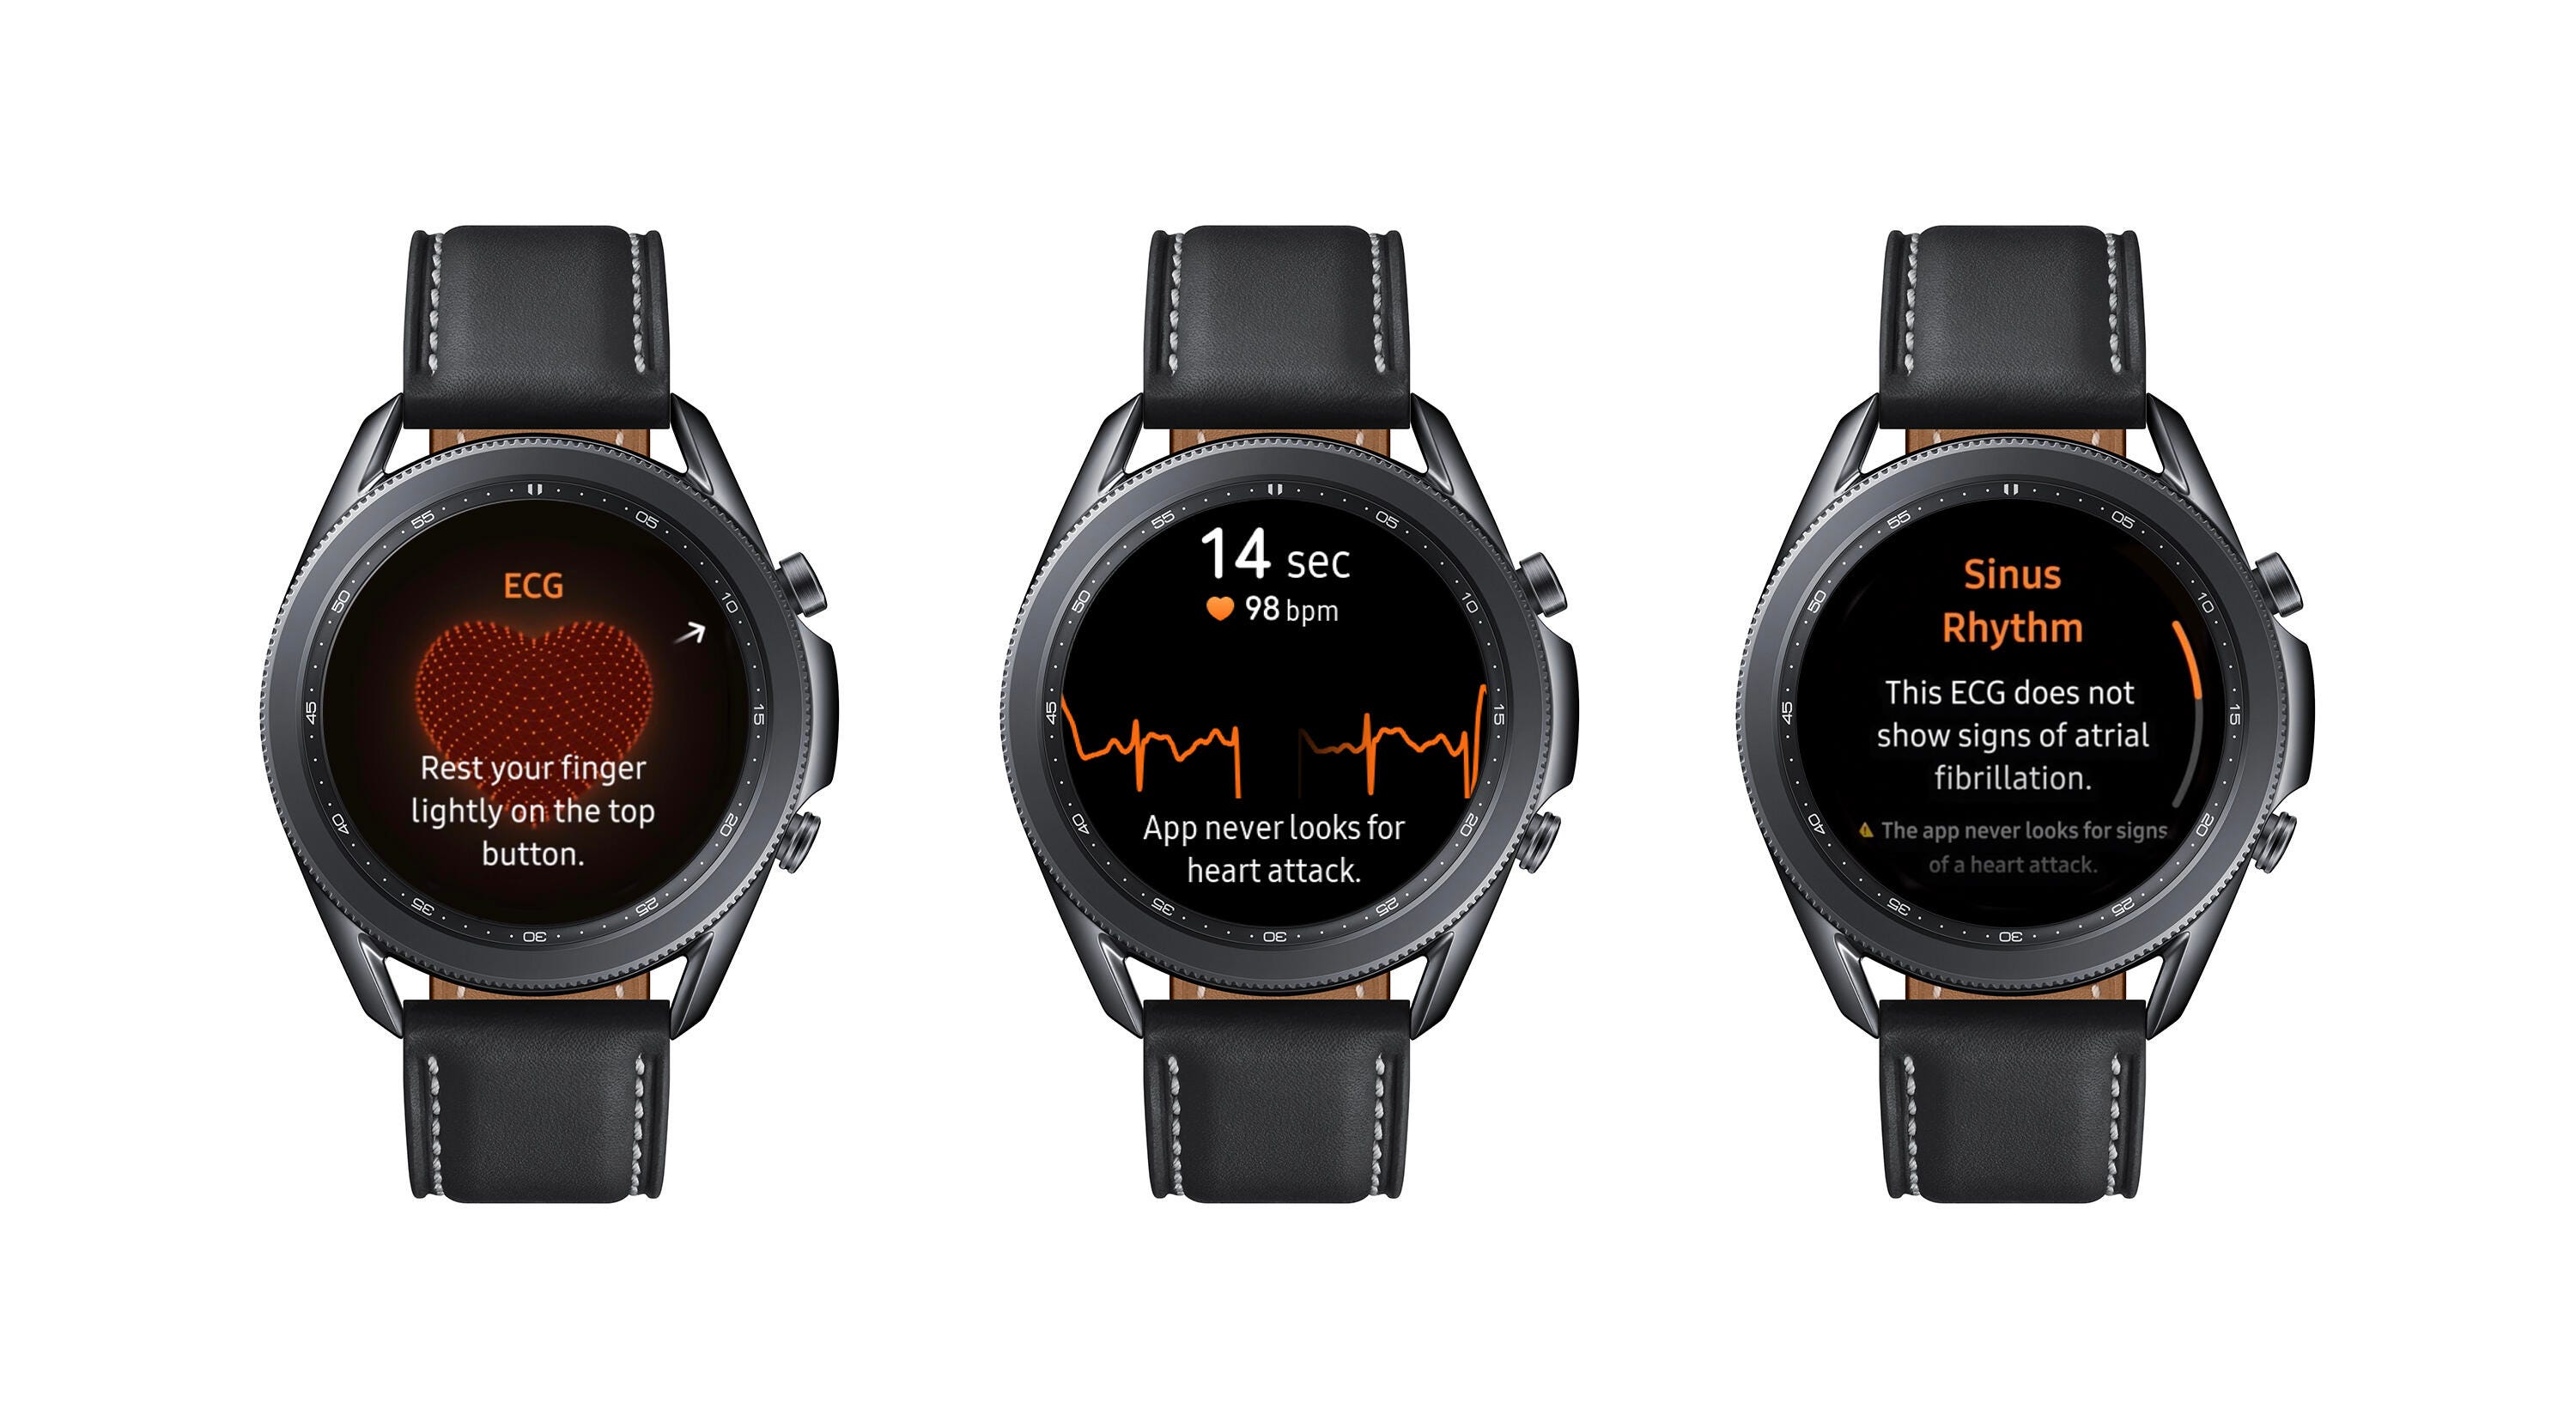 Samsung adds ECG monitor to Galaxy Watch 3 and Galaxy Watch Active 2